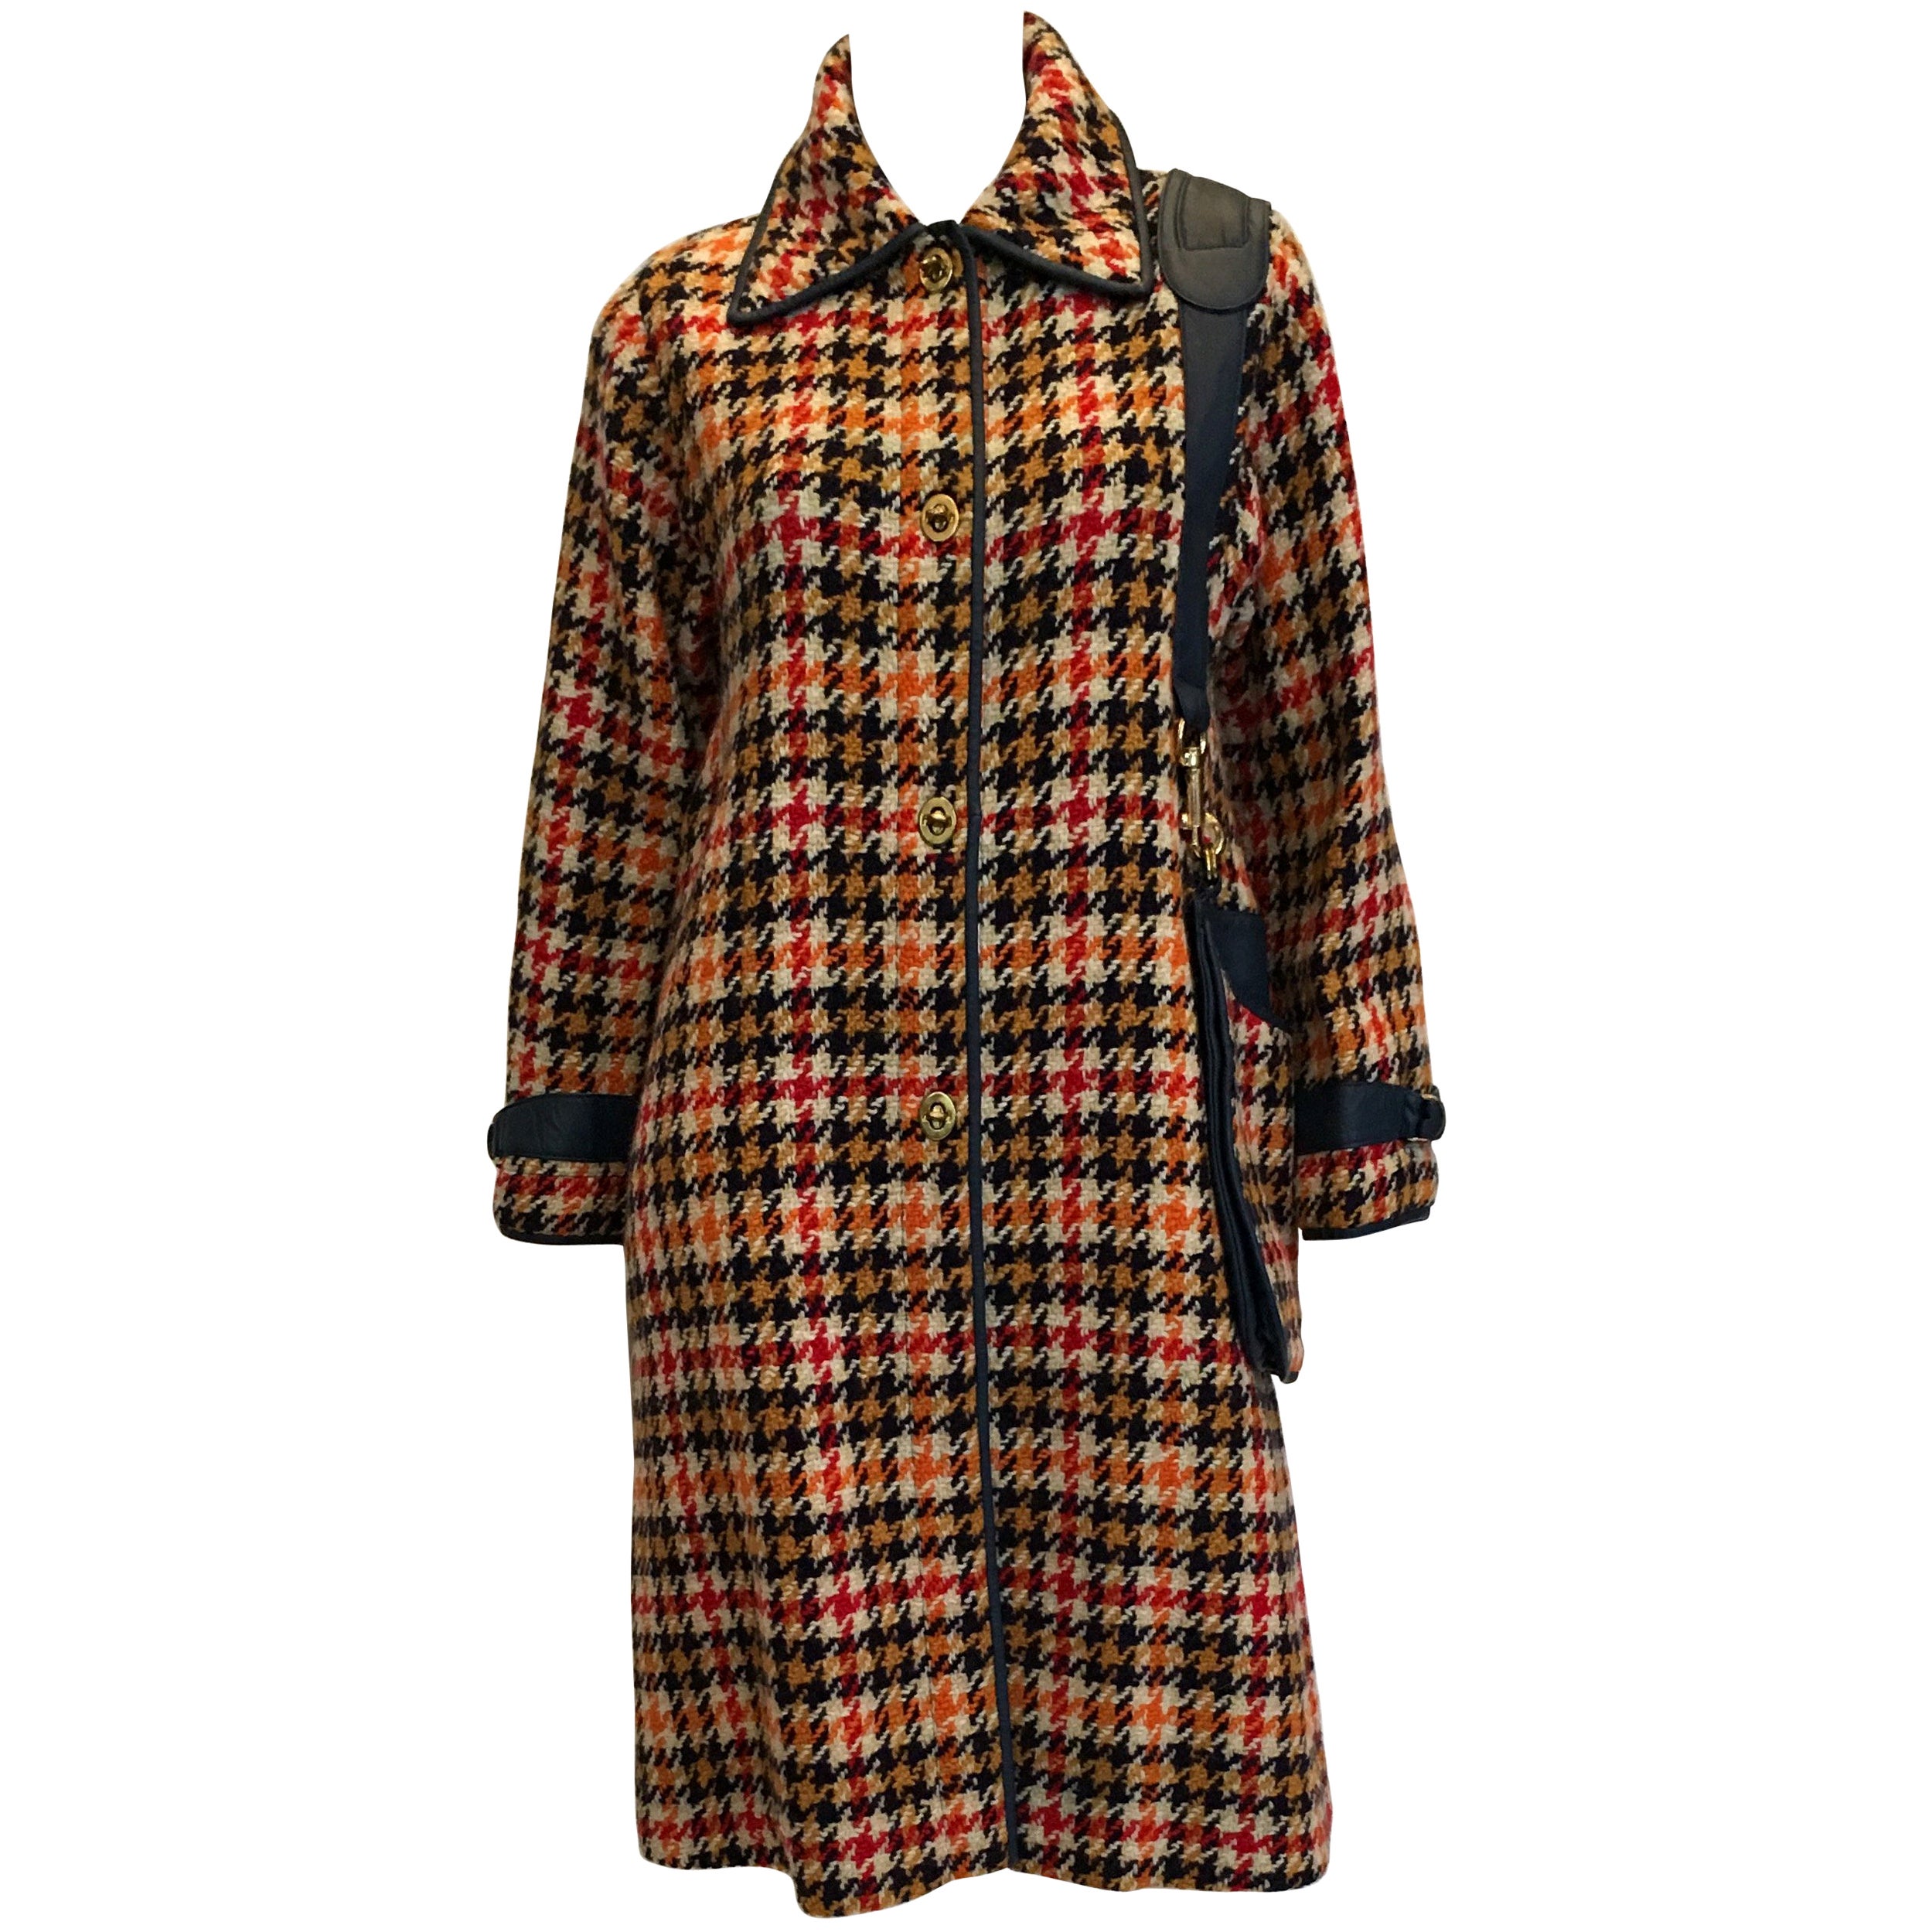 Bonnie Cashin for Sills tweed coat and stole set 1960s at 1stDibs